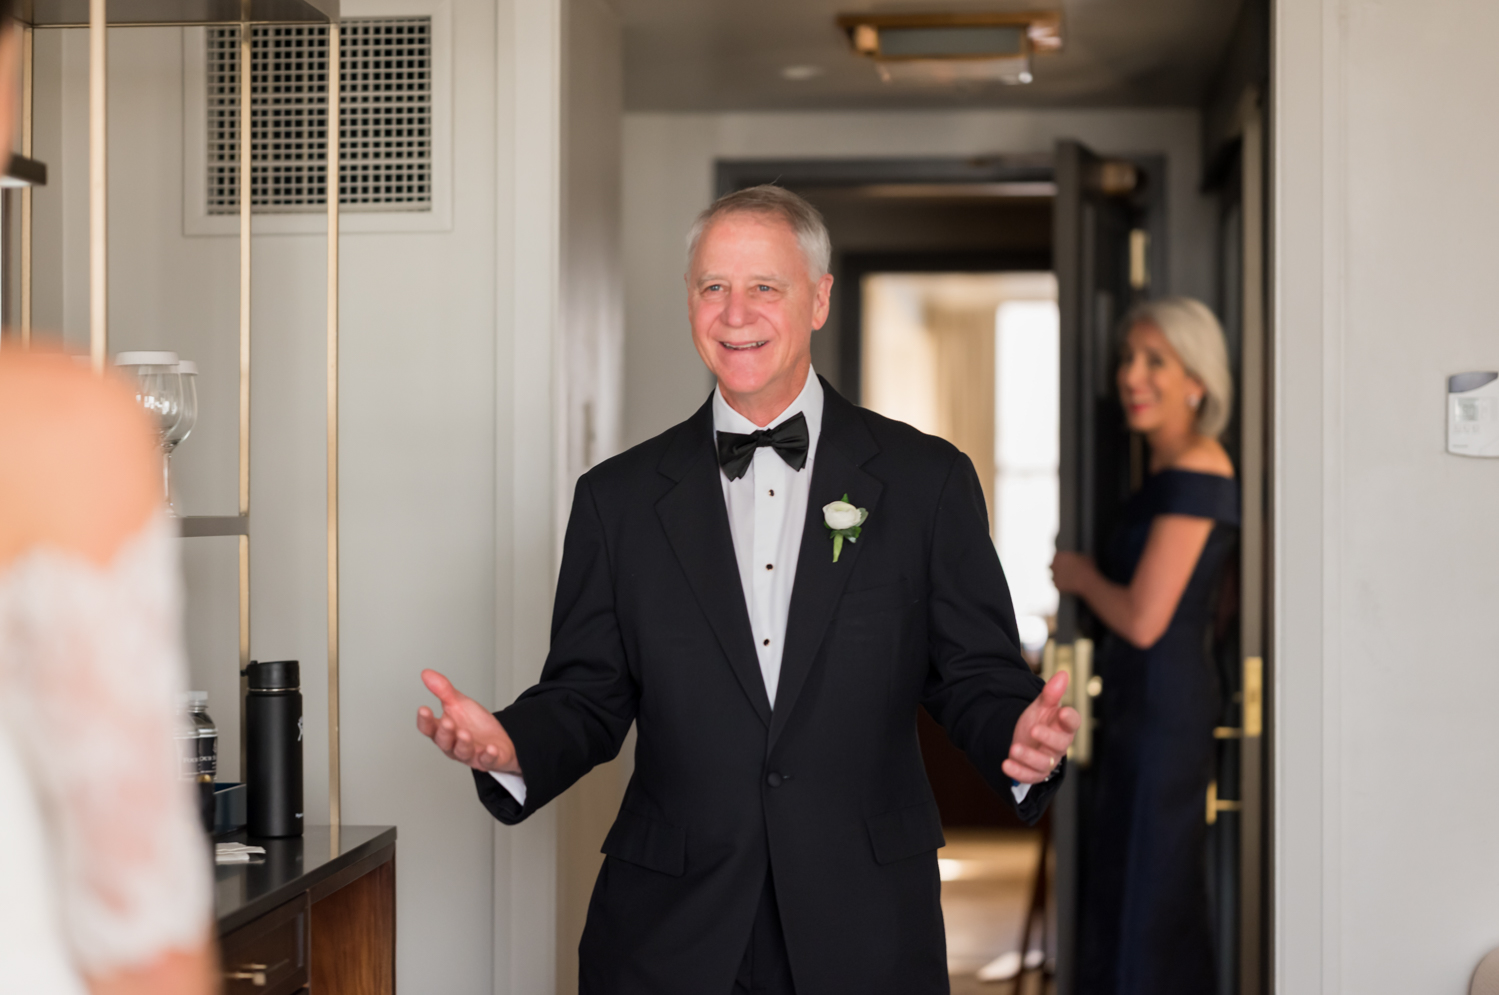 The father of the bride smiles as he sees his daughter in her wedding dress for the first time